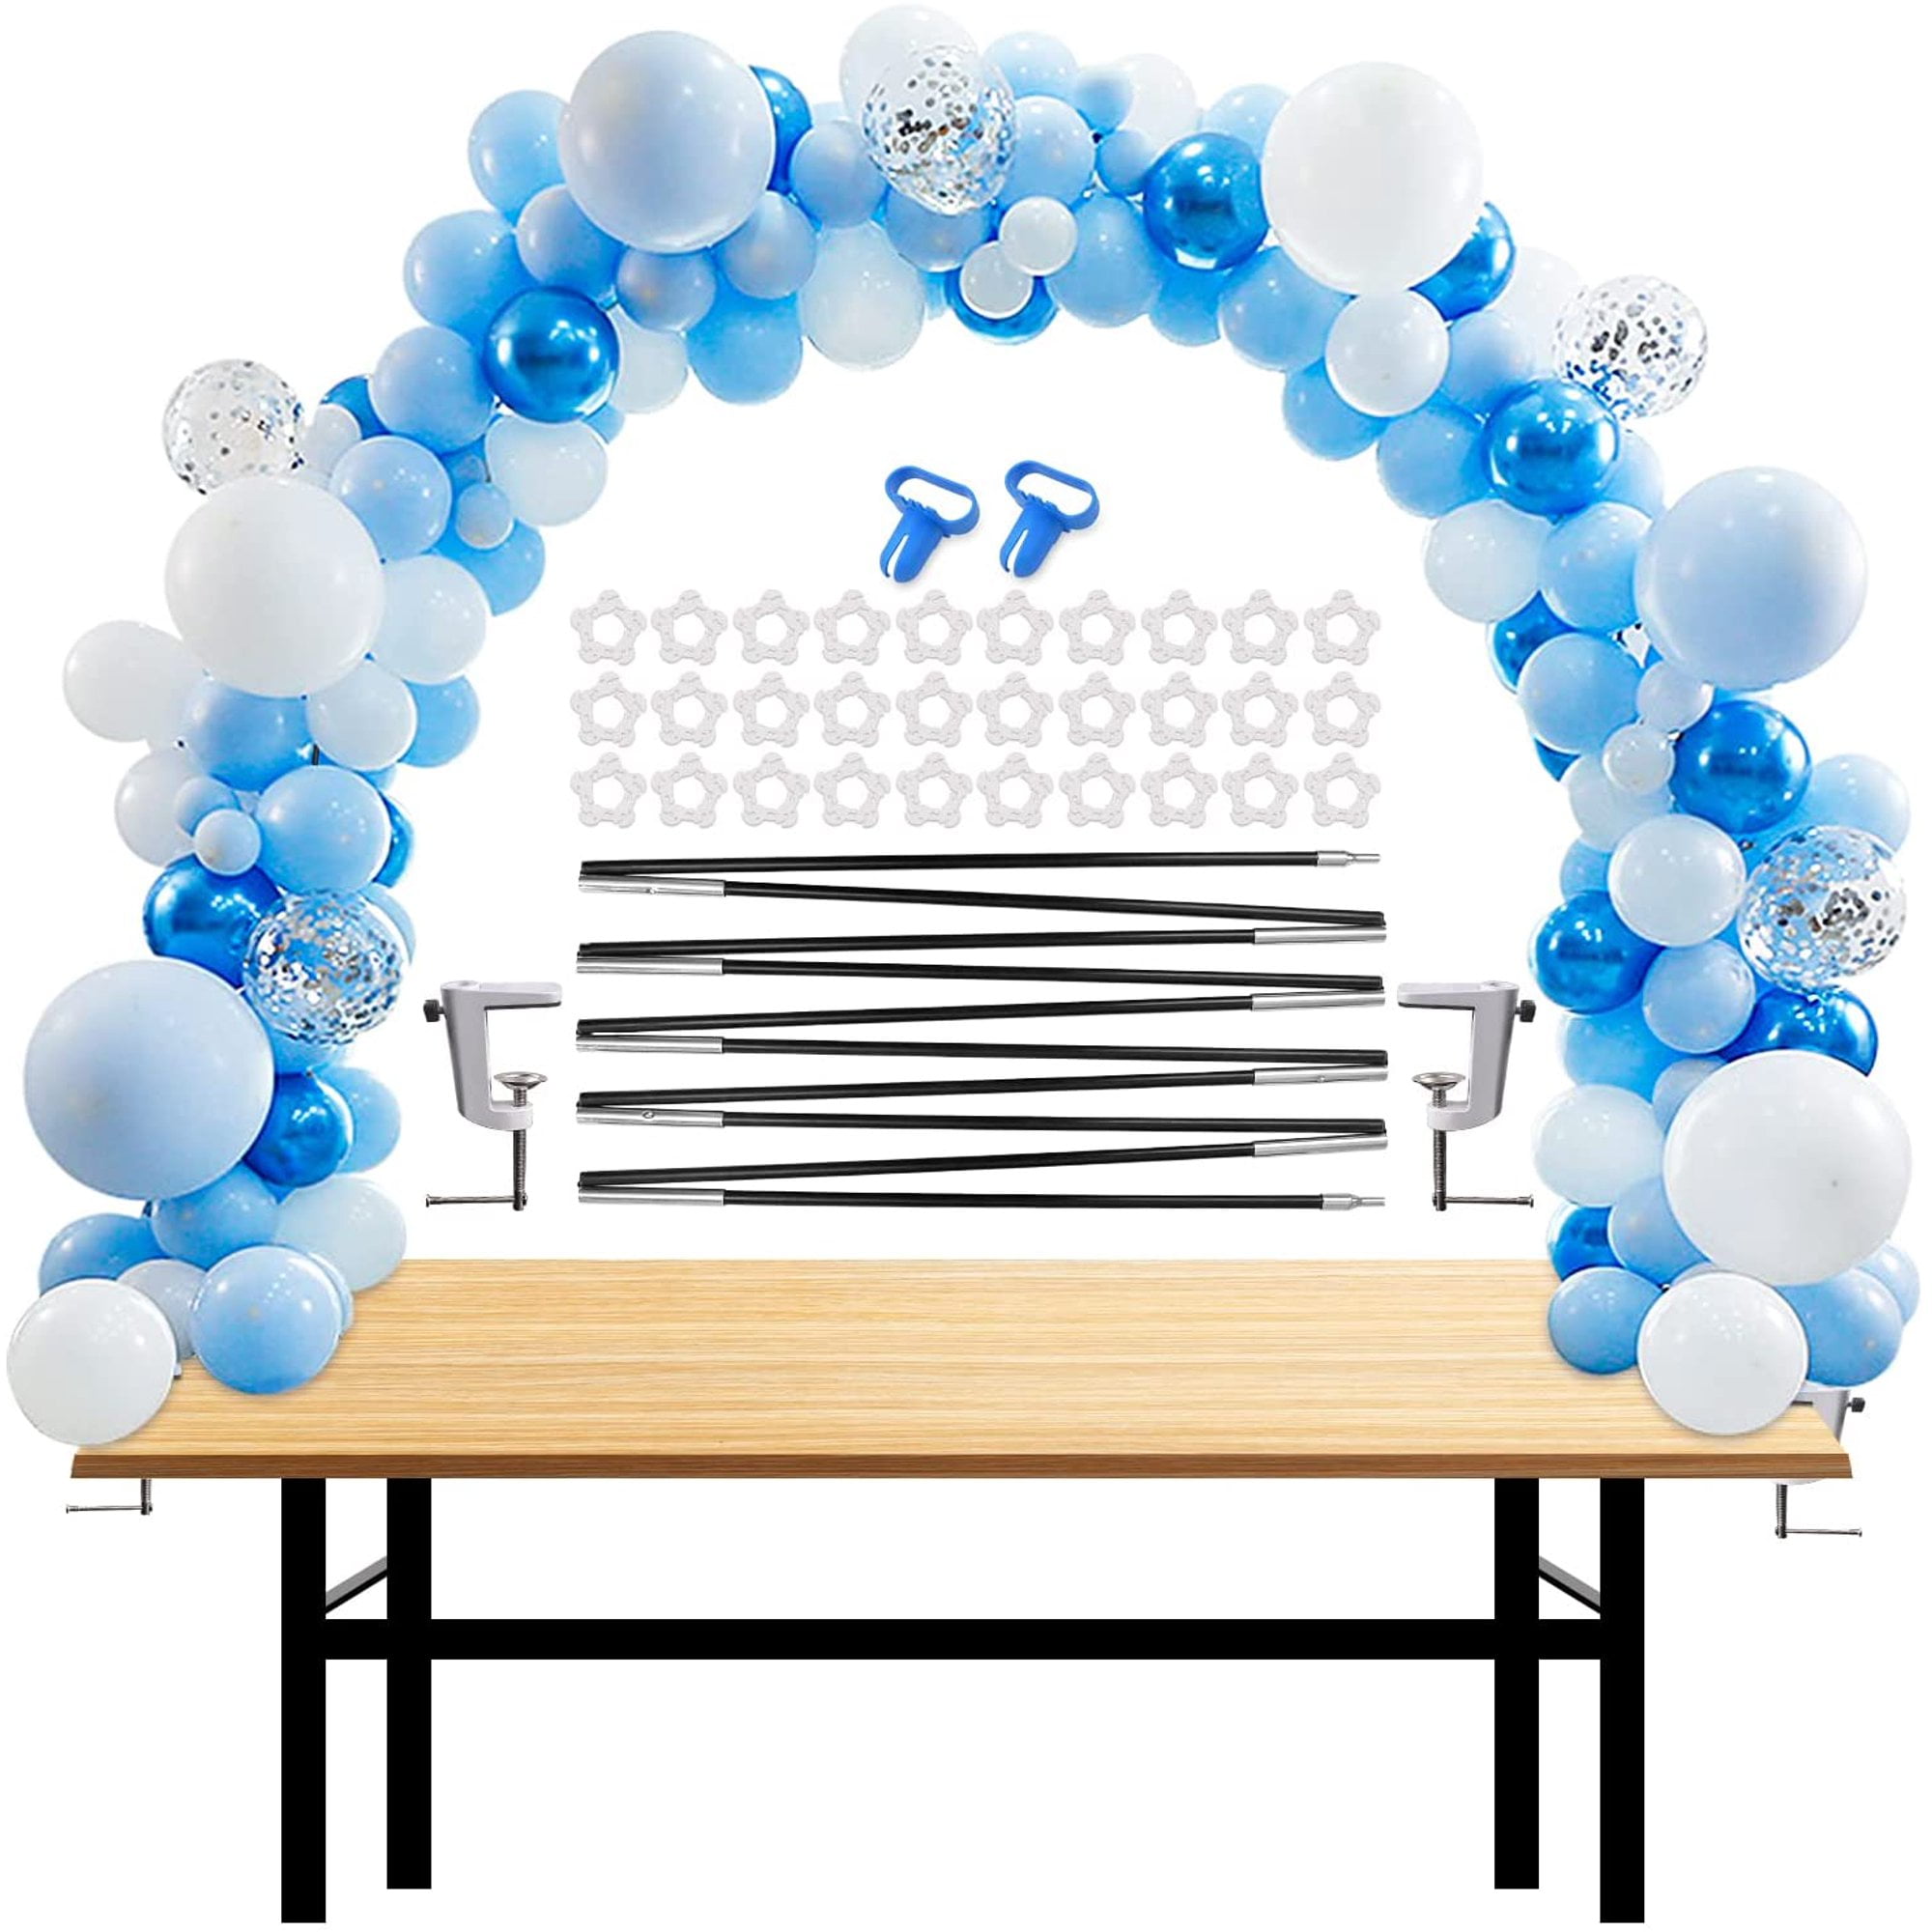 Langxun 12ft Table Balloon Arch Kit for Birthday Decorations Party Wedding and for sale online 